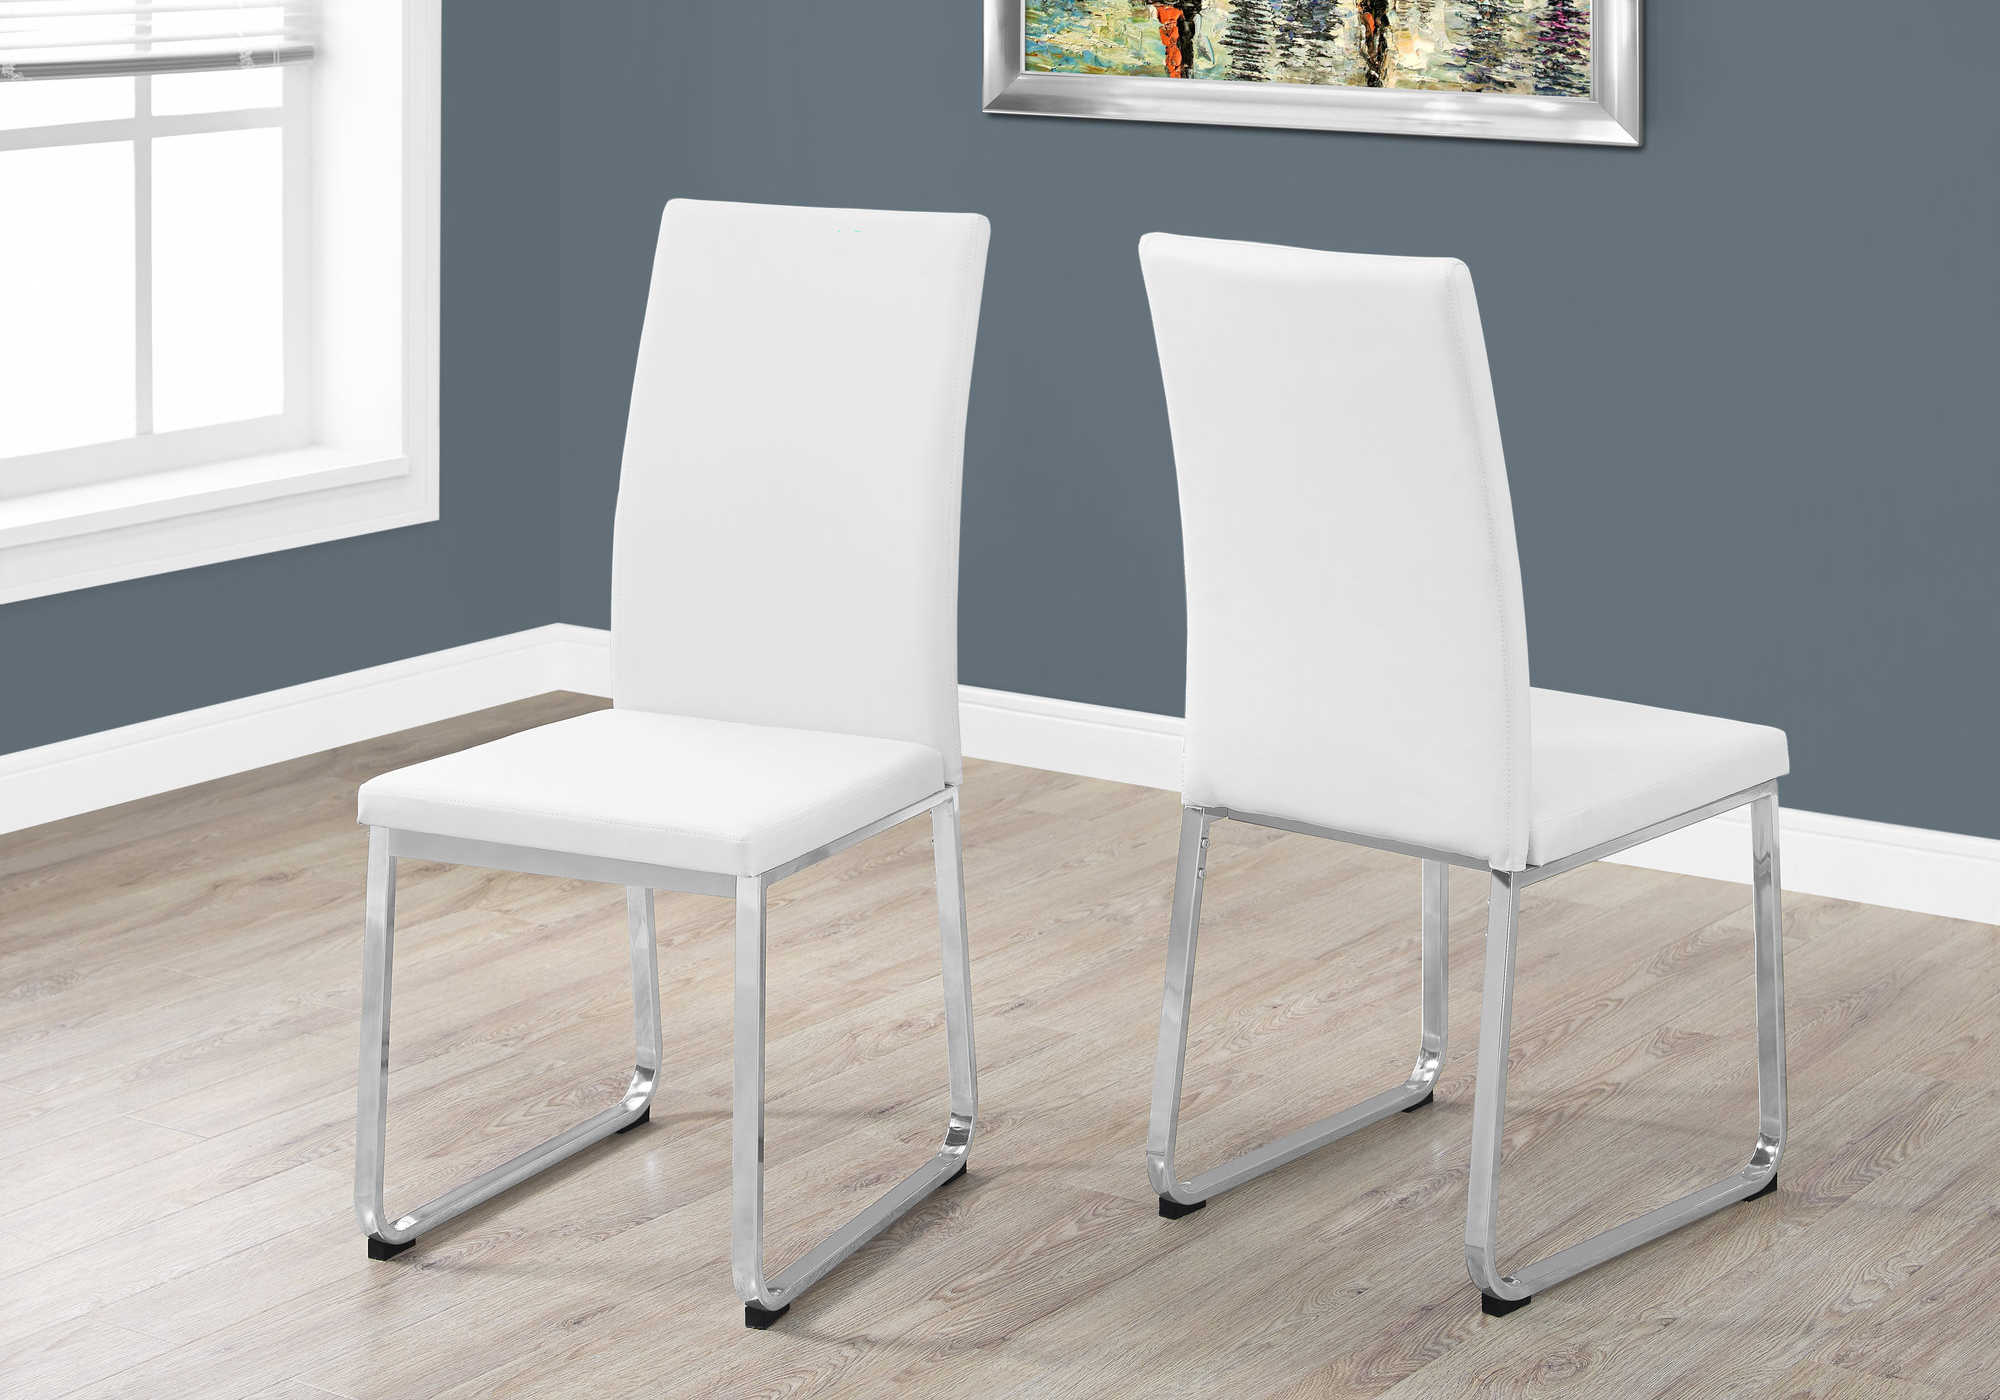 DINING CHAIR - 2PCS / 38"H / WHITE LEATHER-LOOK / CHROME